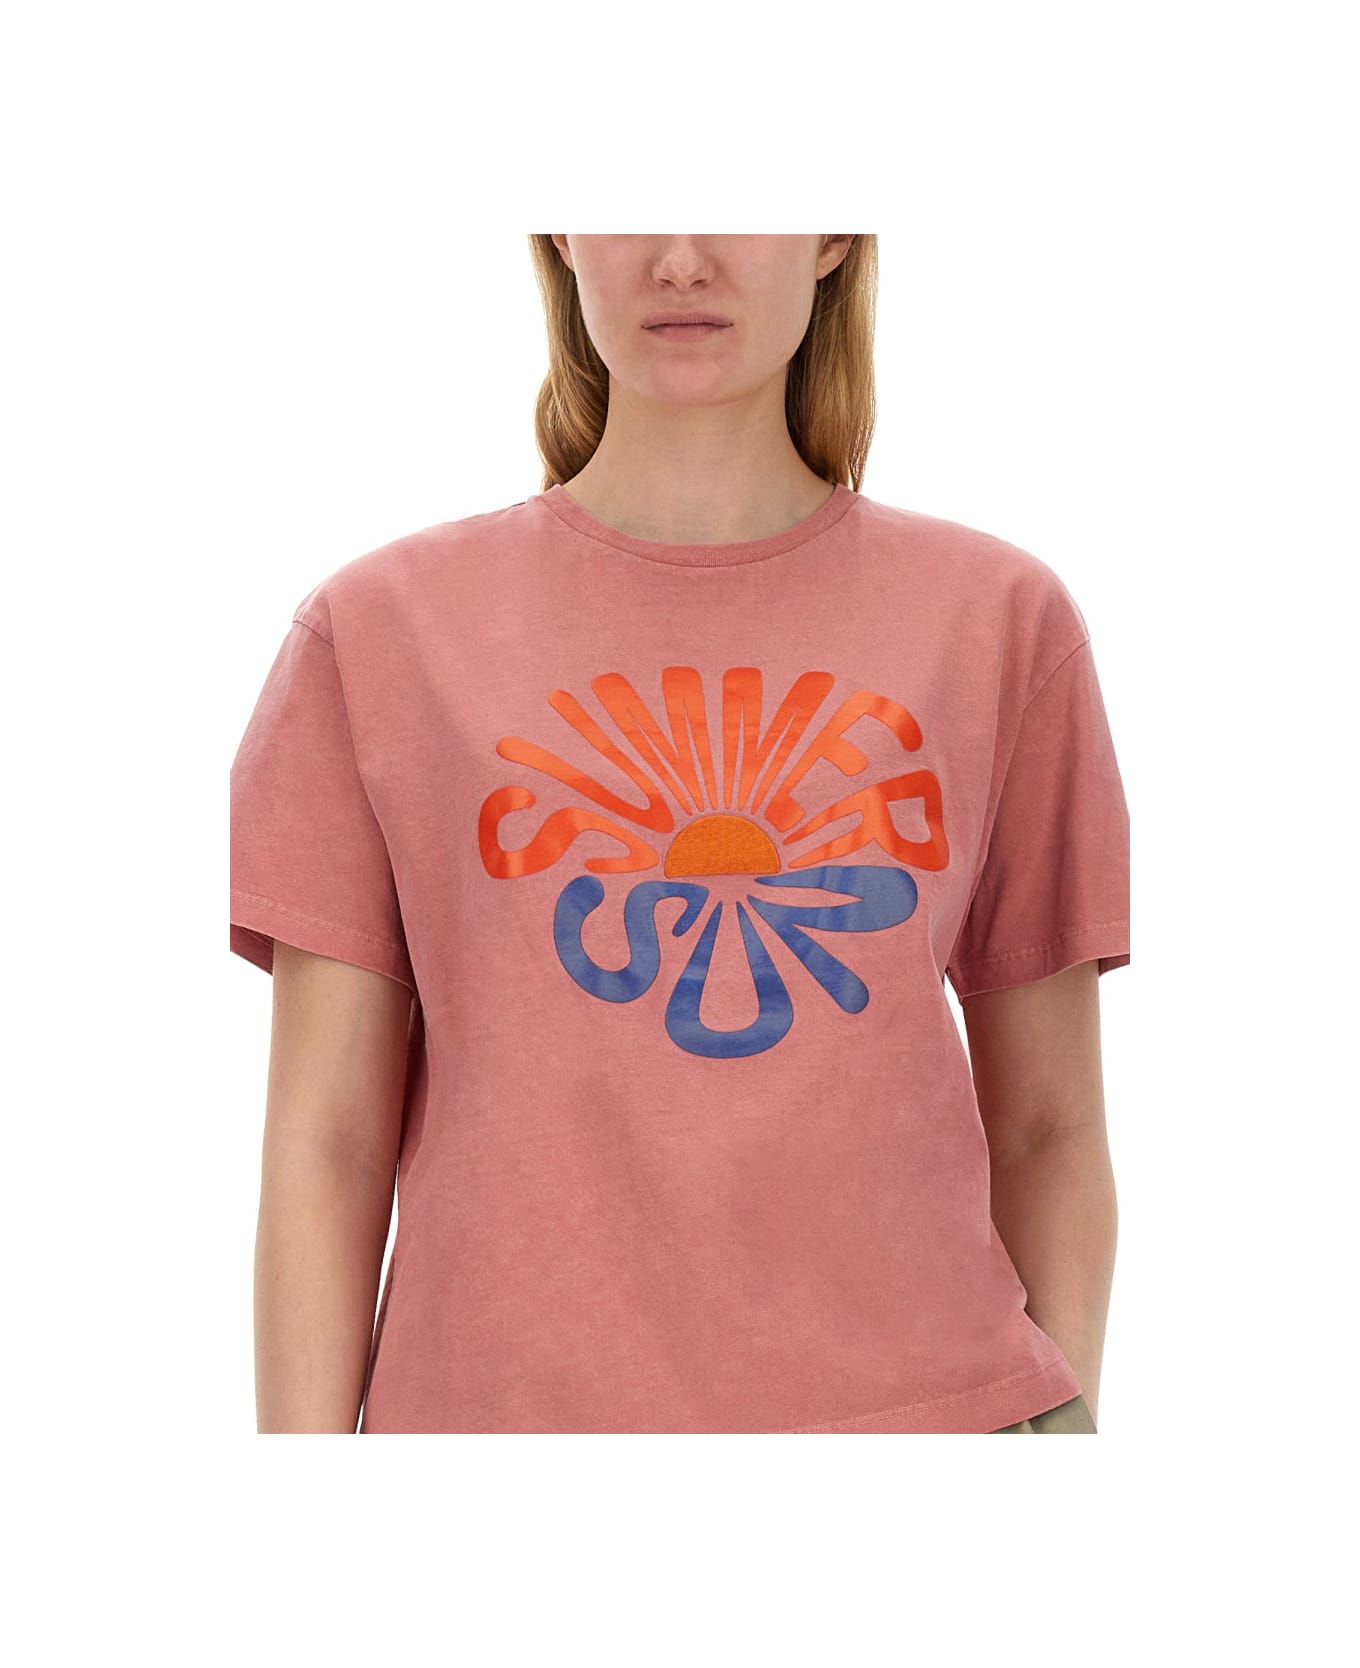 PS by Paul Smith Summer Sun Print T-shirt - PINK Tシャツ